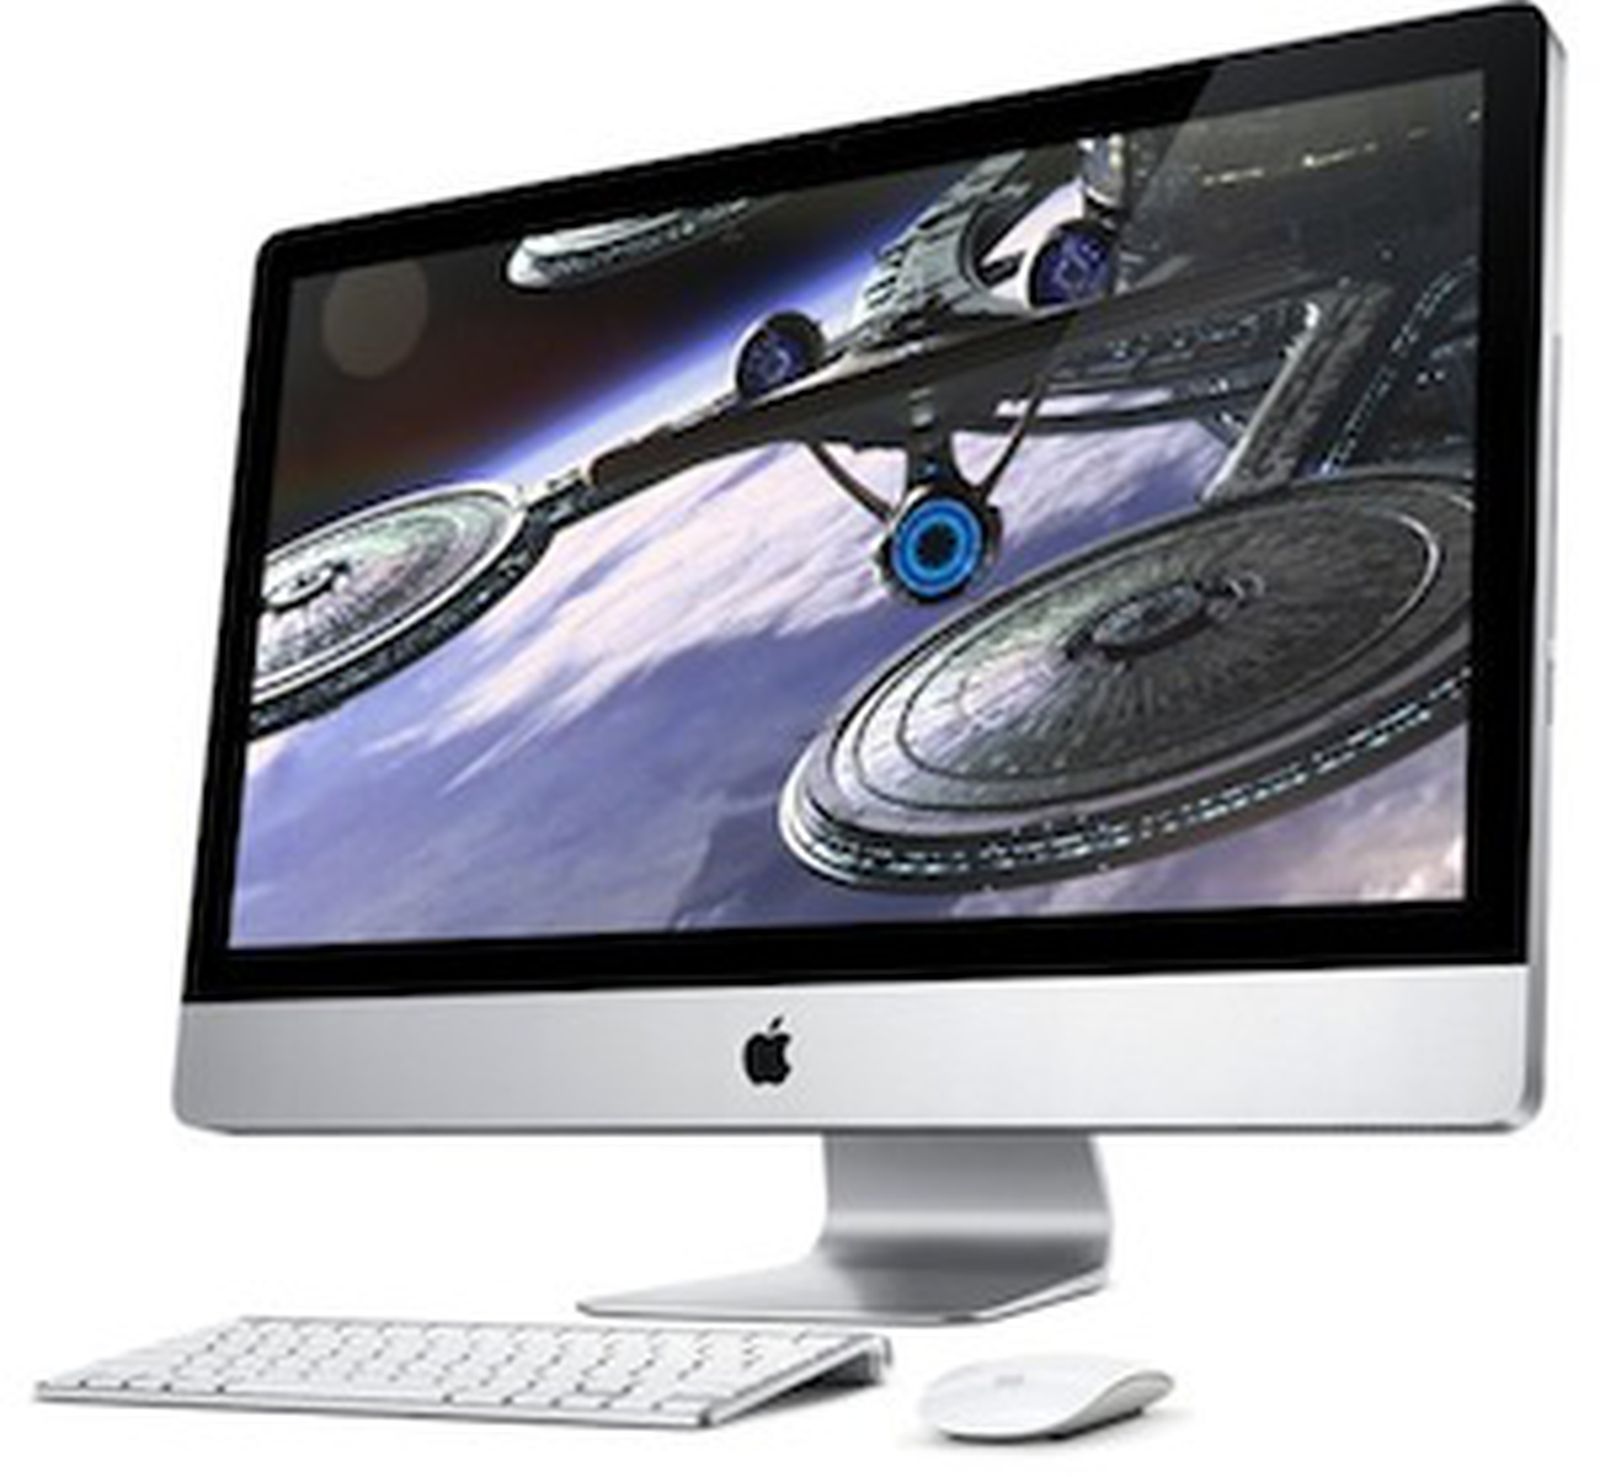 Apple Claims Display Issues on 27-Inch iMac Have Been Addressed - MacRumors